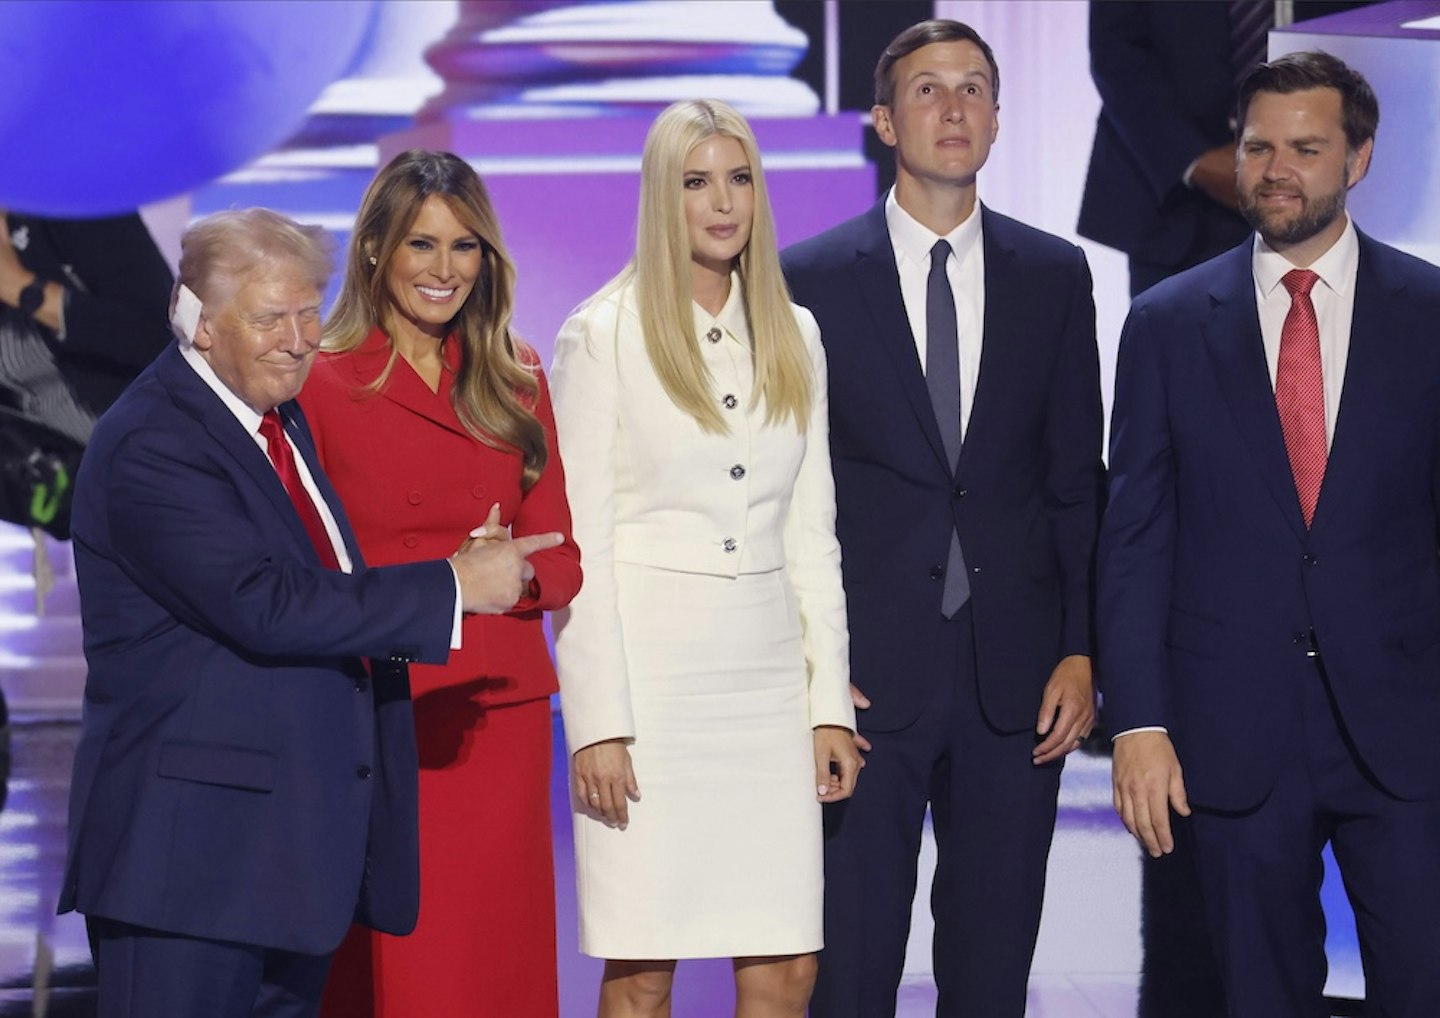 The Trump family at the 2024 RNC